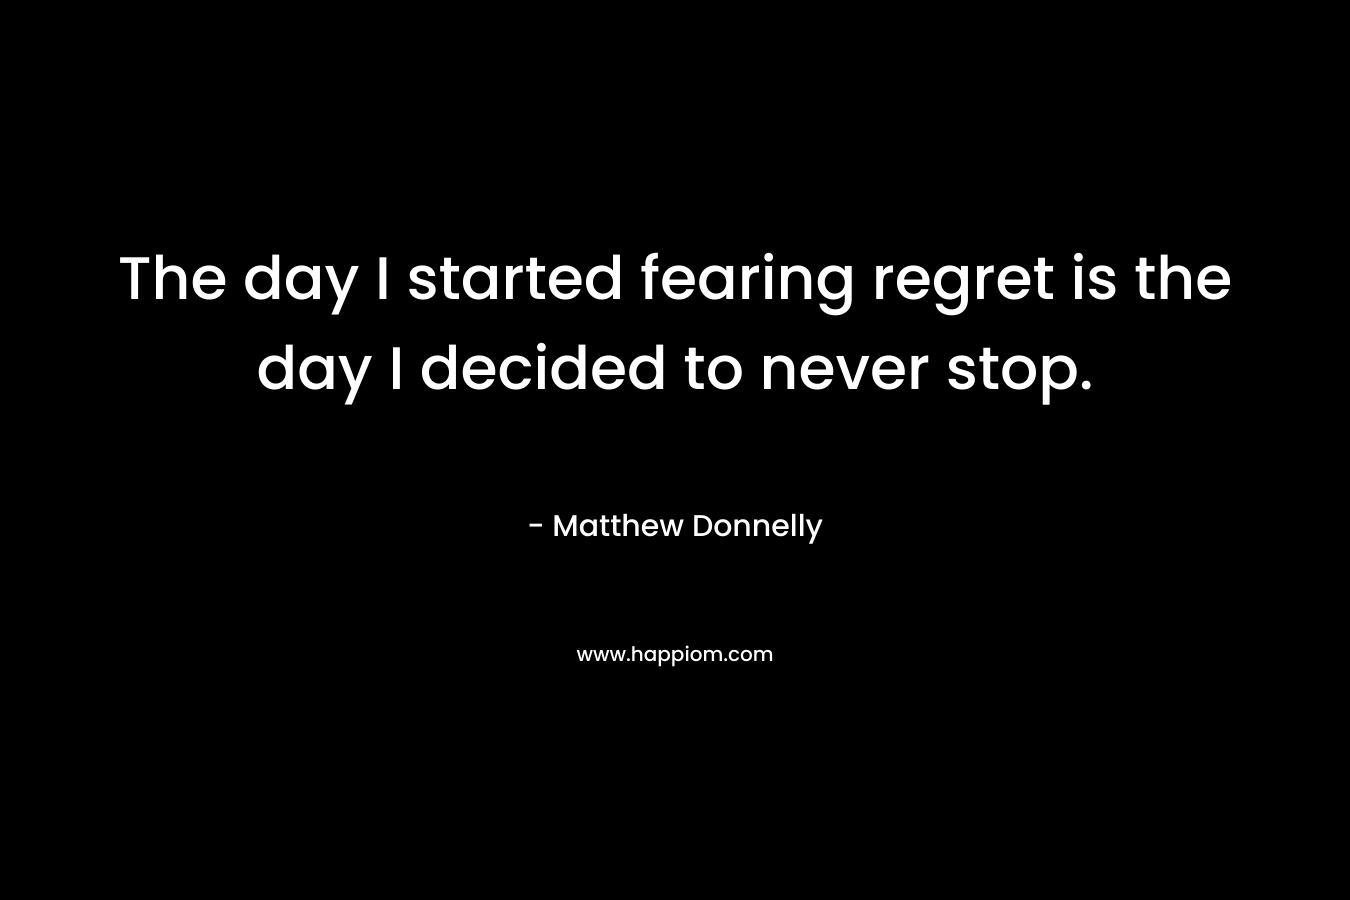 The day I started fearing regret is the day I decided to never stop.